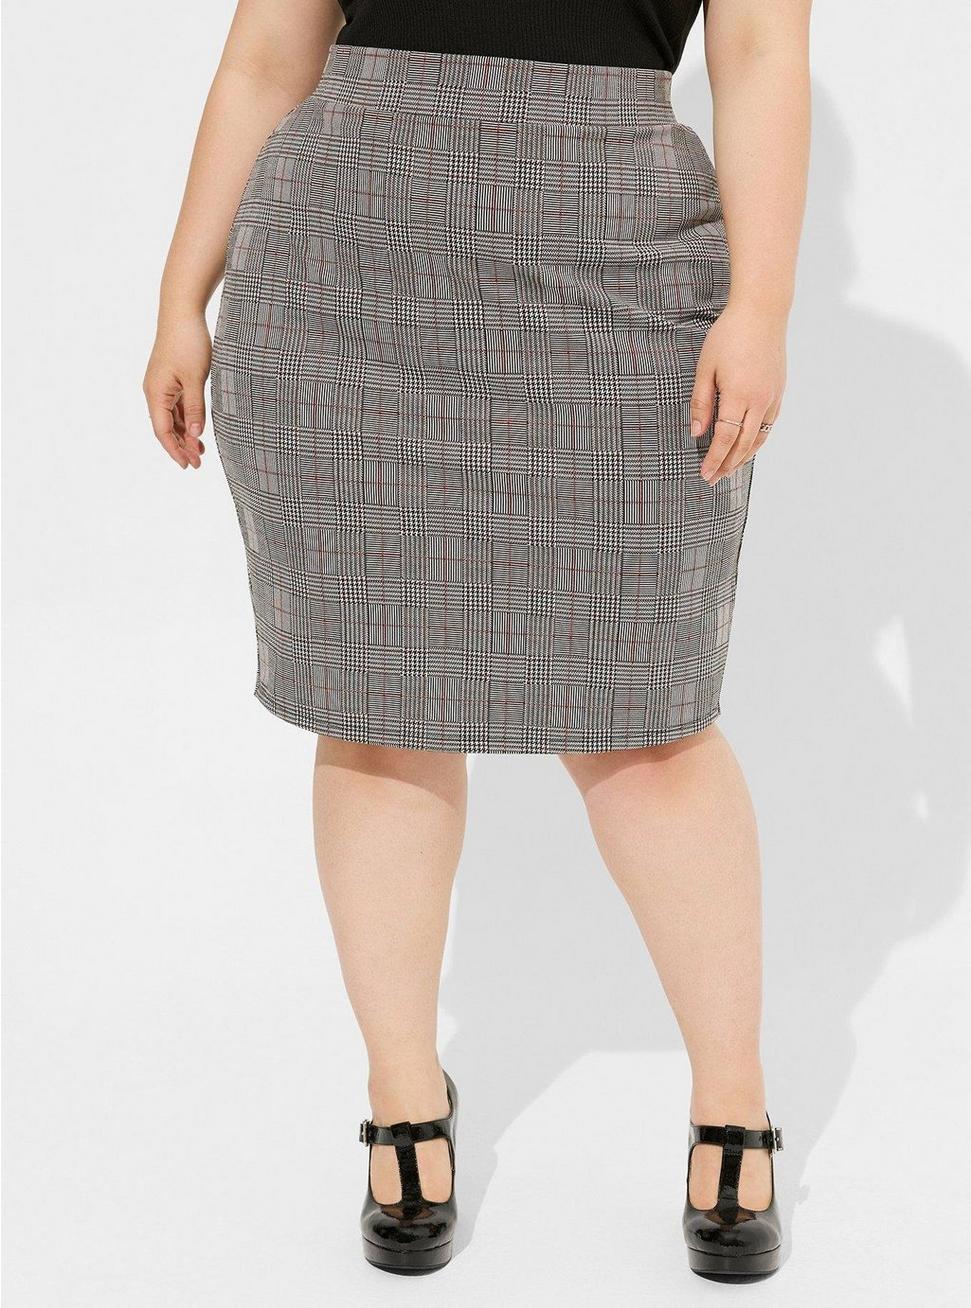 At The Knee Double Knit Pencil Skirt, MULTI PLAID, alternate